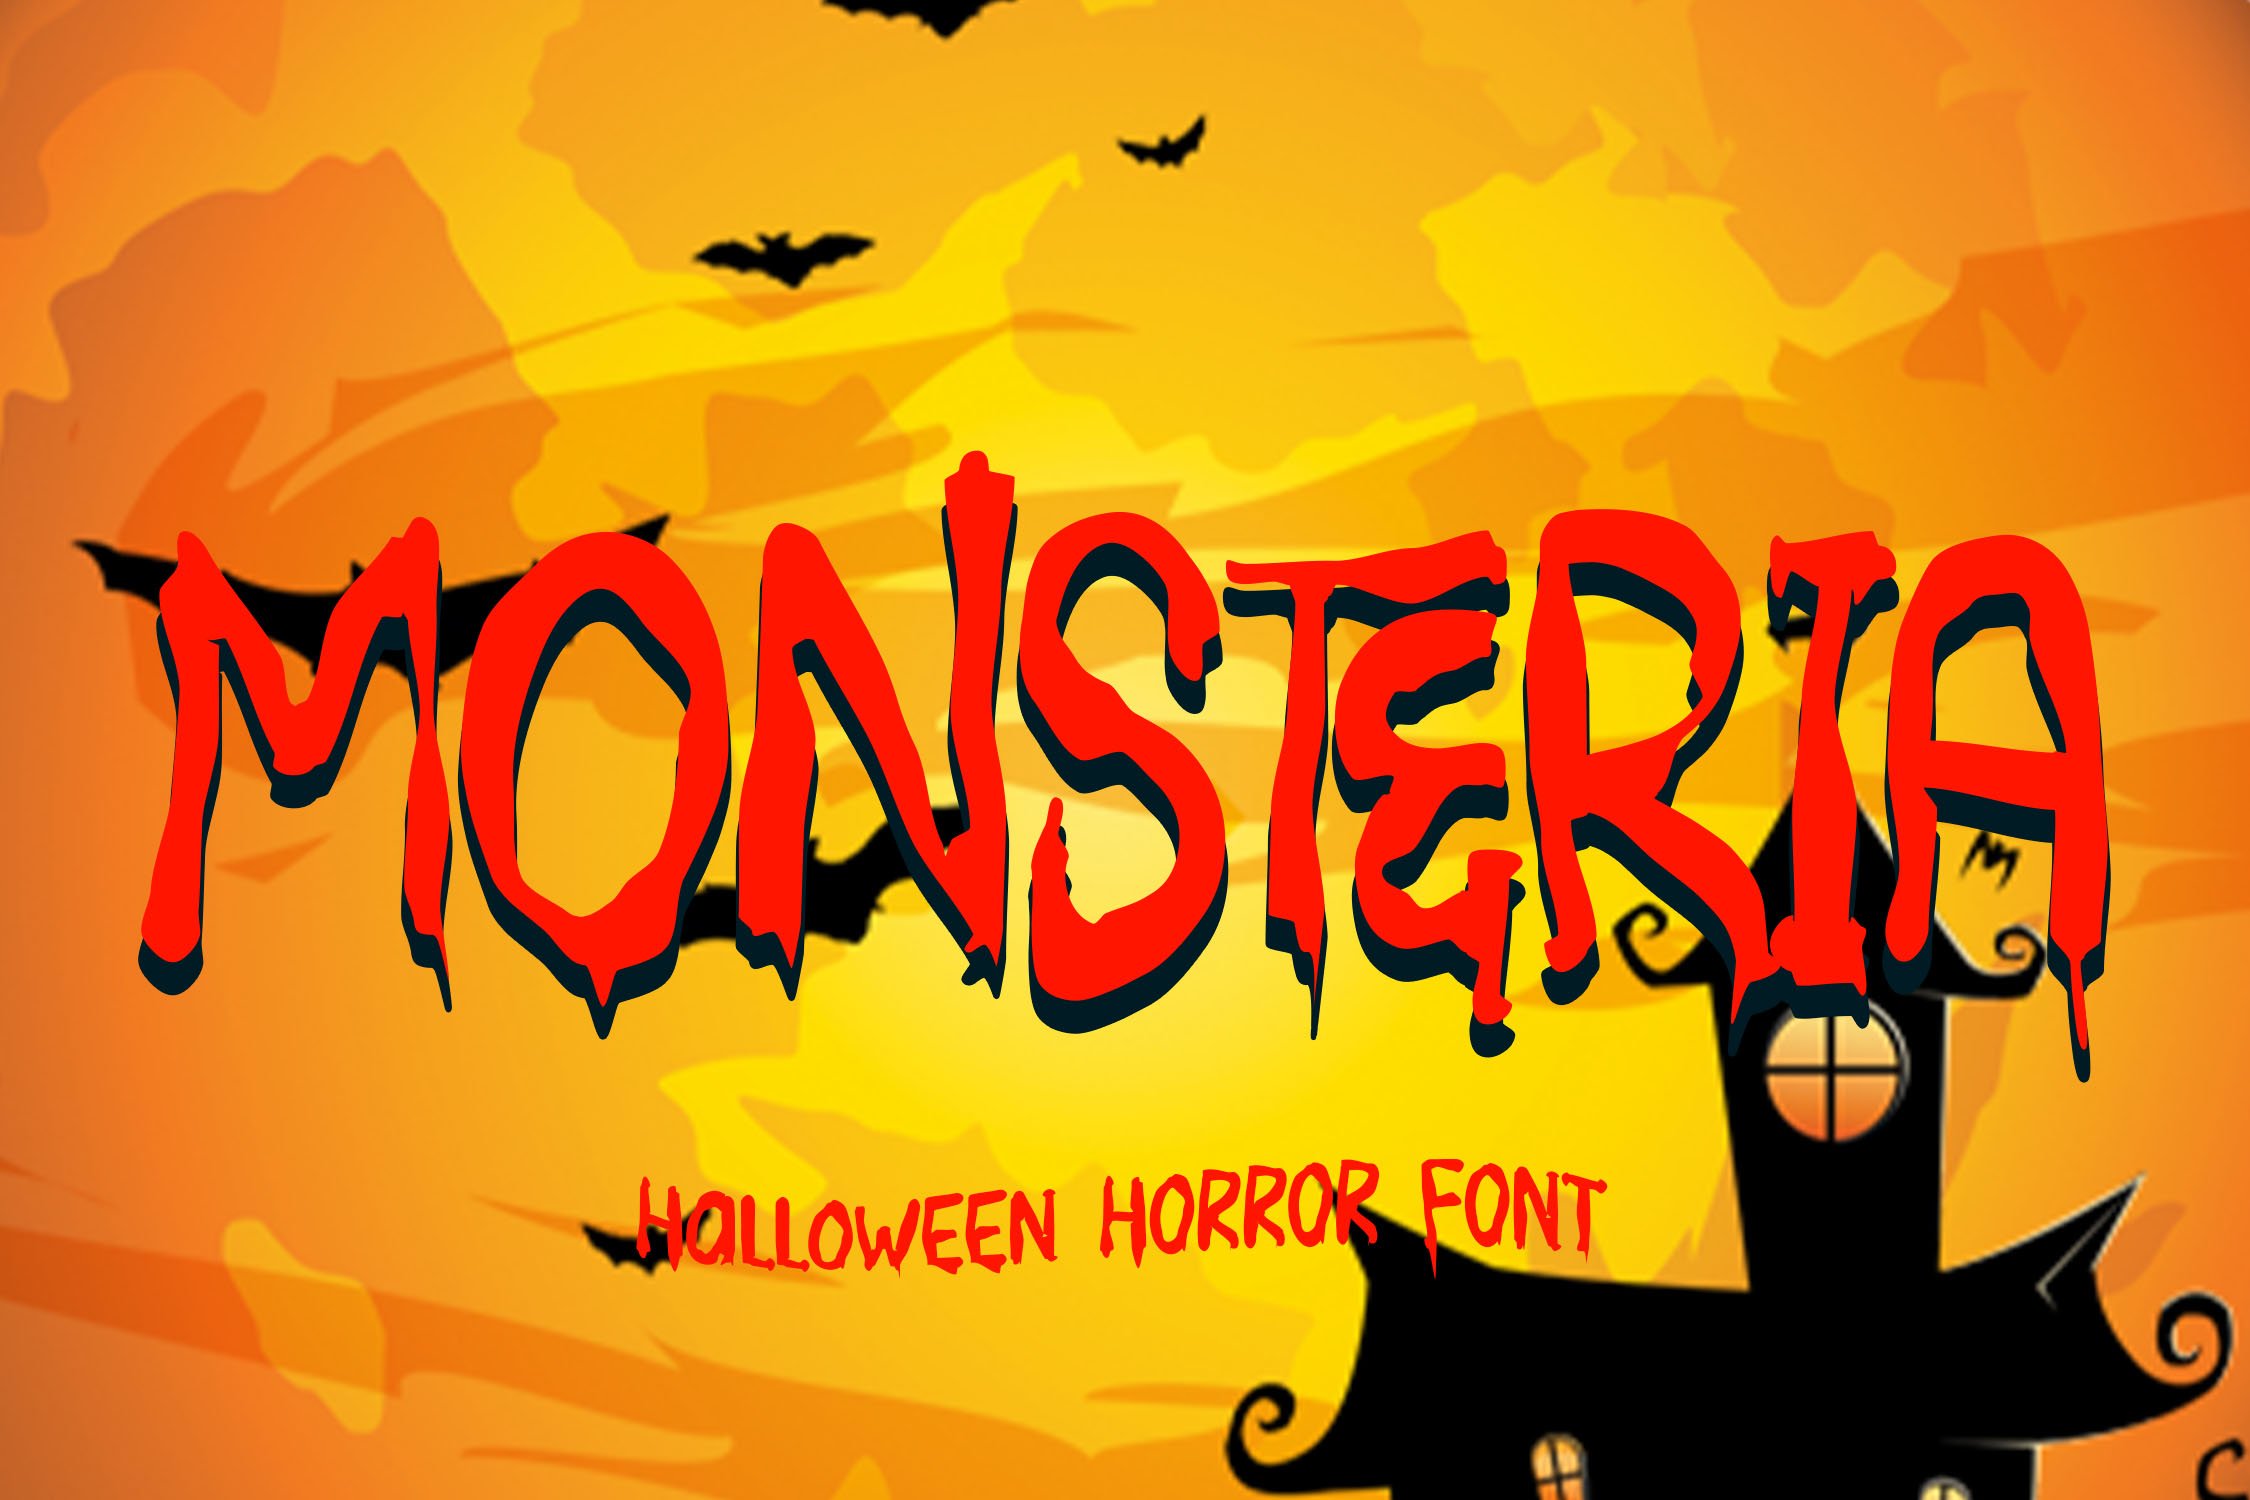 MONSTERIA - Halloween Font cover image.